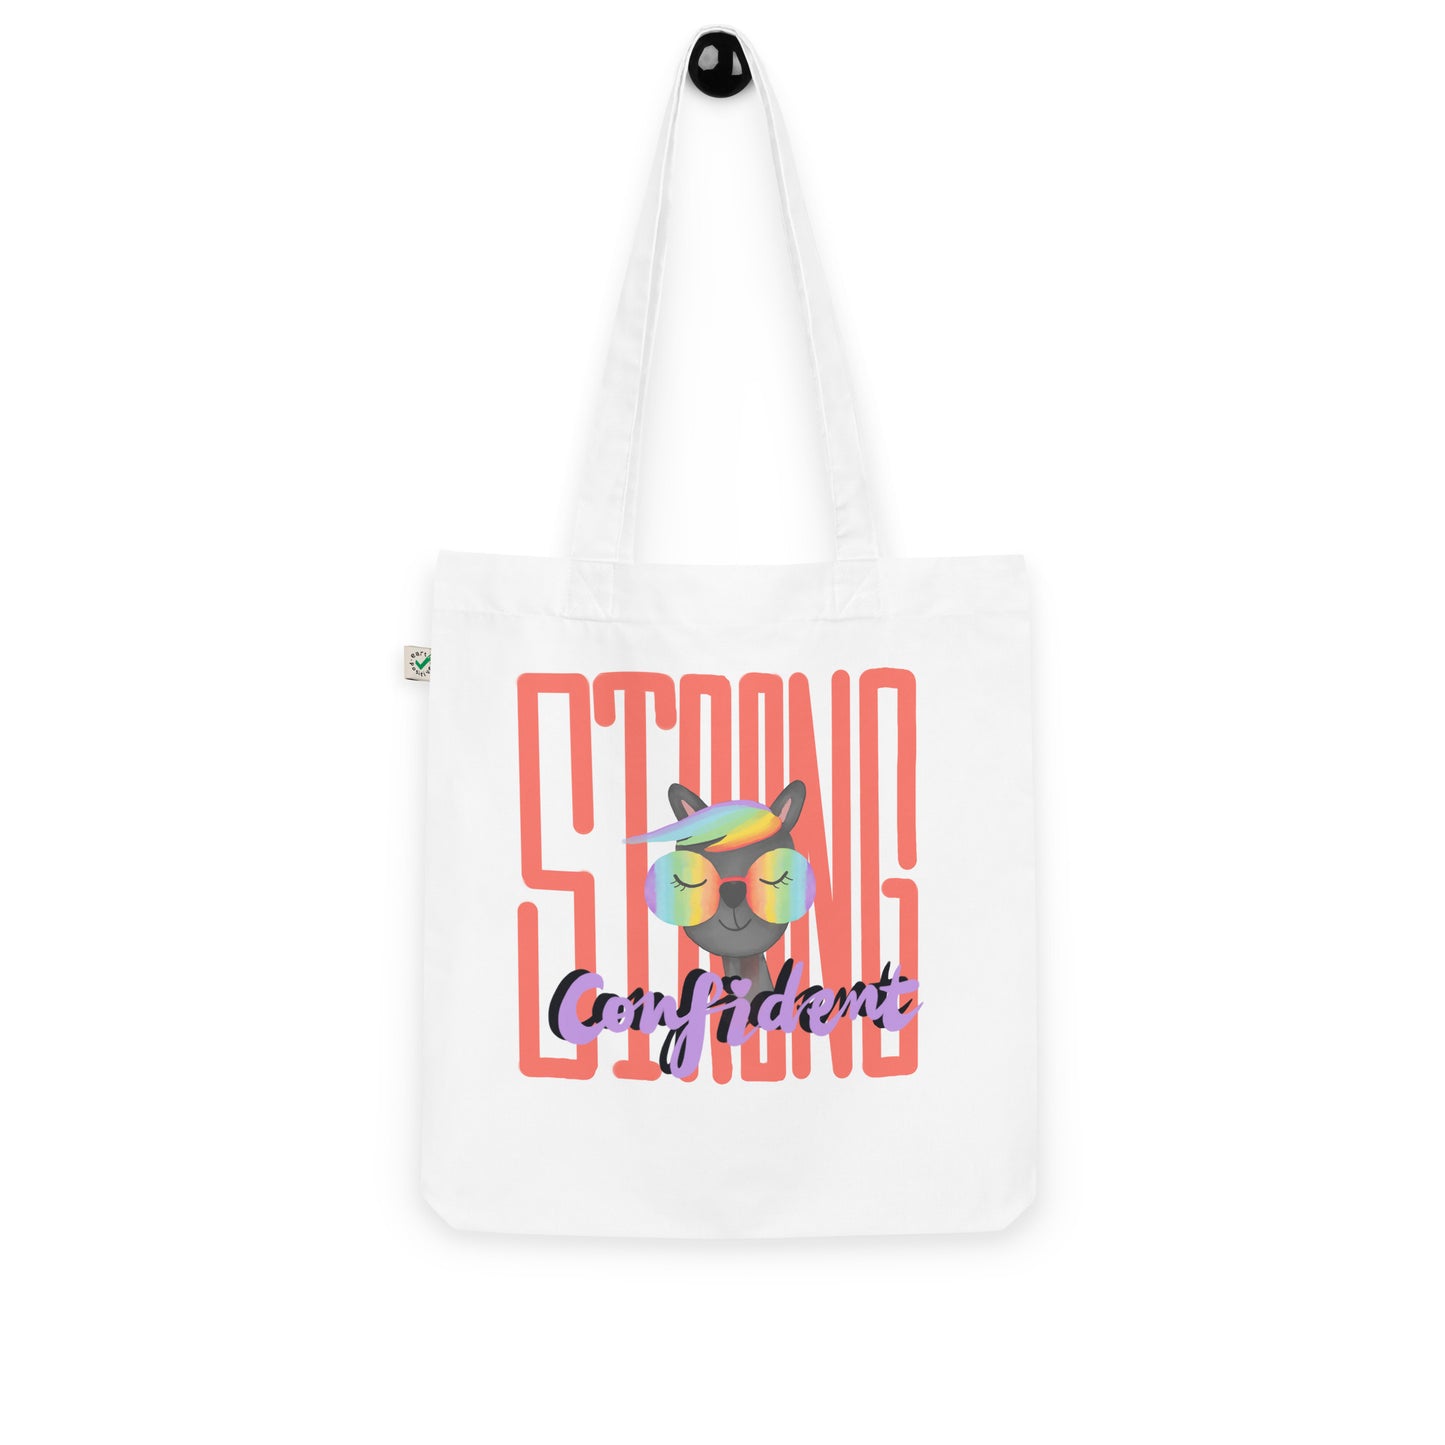 Strong Confident Organic Fashion Tote Bag